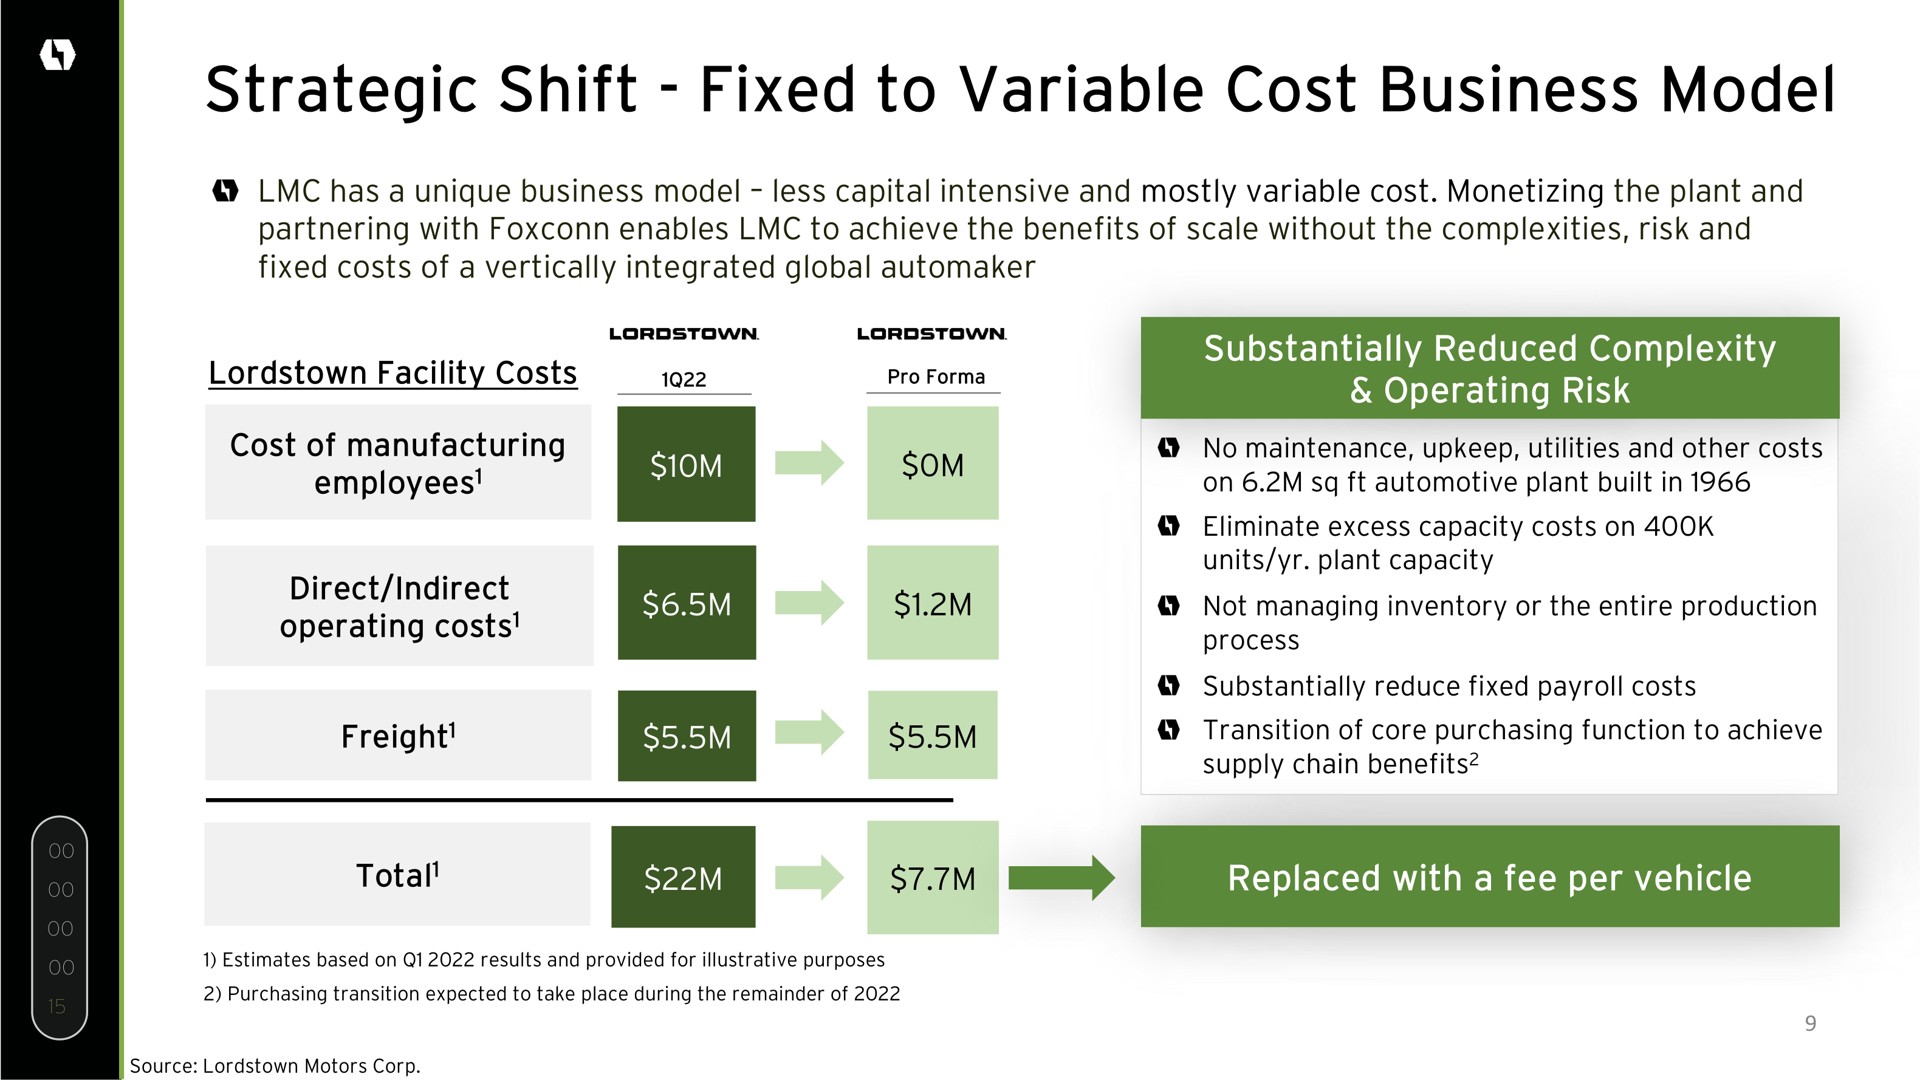 strategic shift fixed to variable cost business model | Lordstown Motors